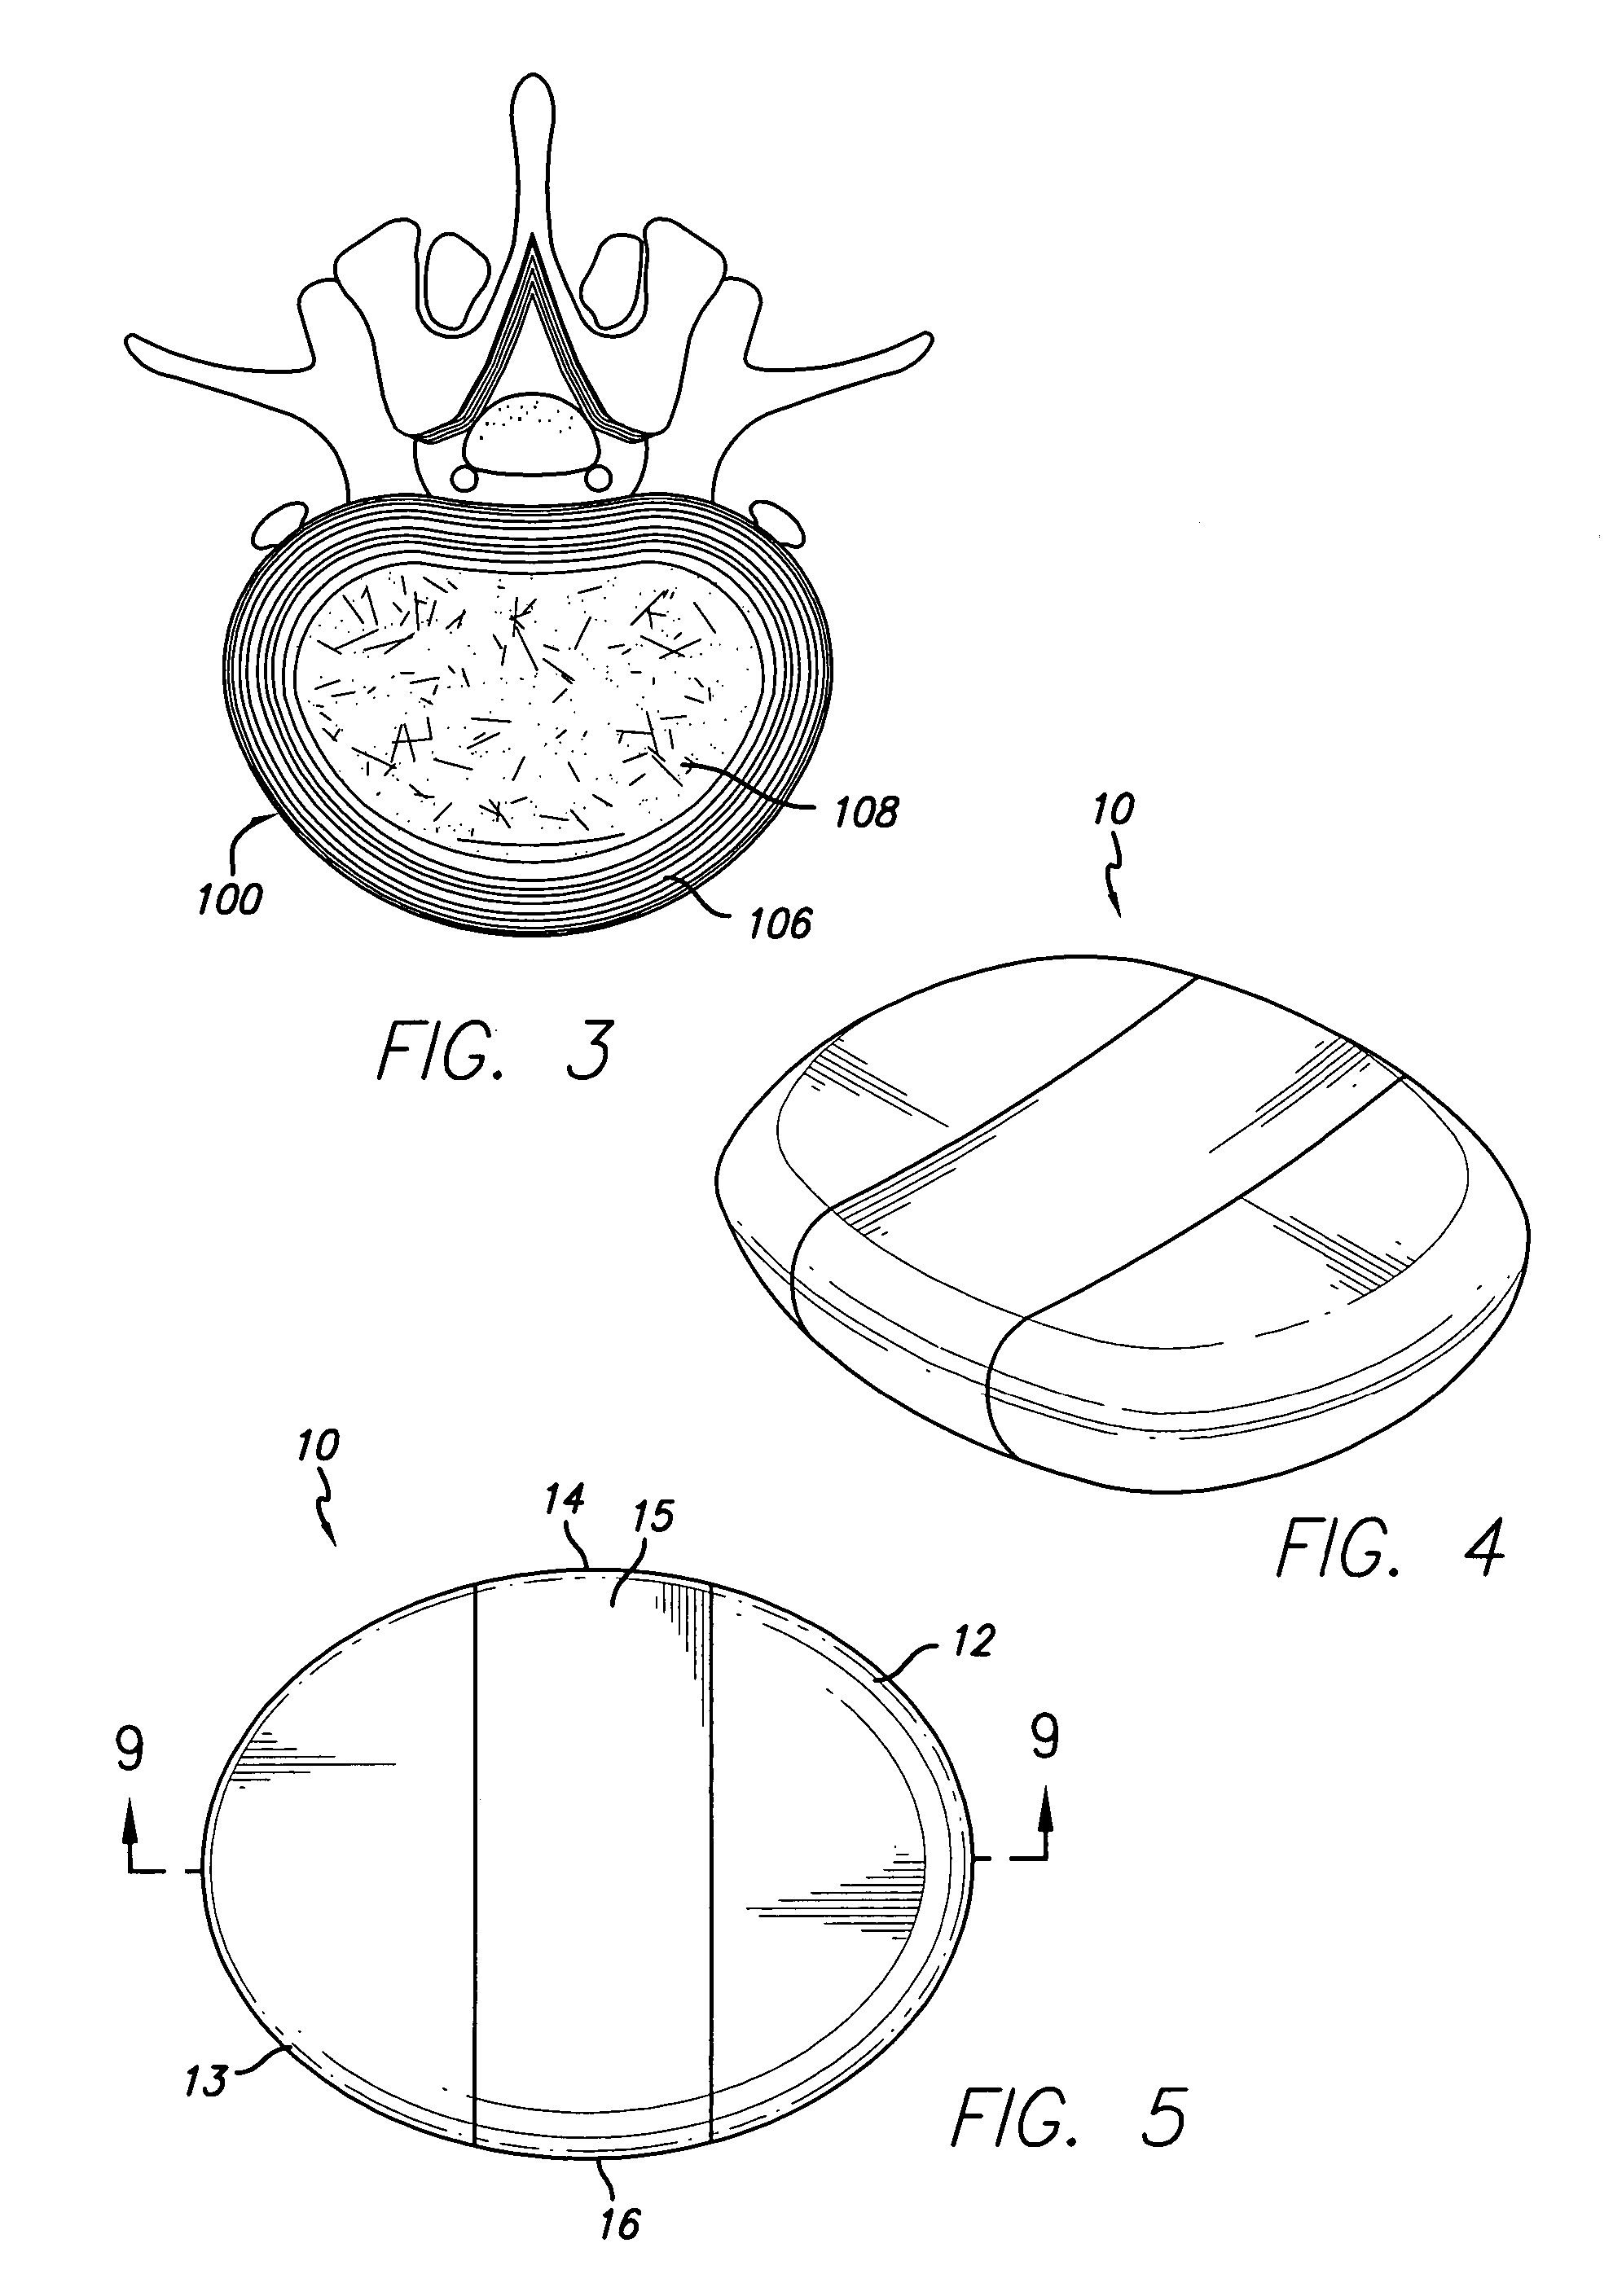 Implant material for minimally invasive spinal interbody fusion surgery